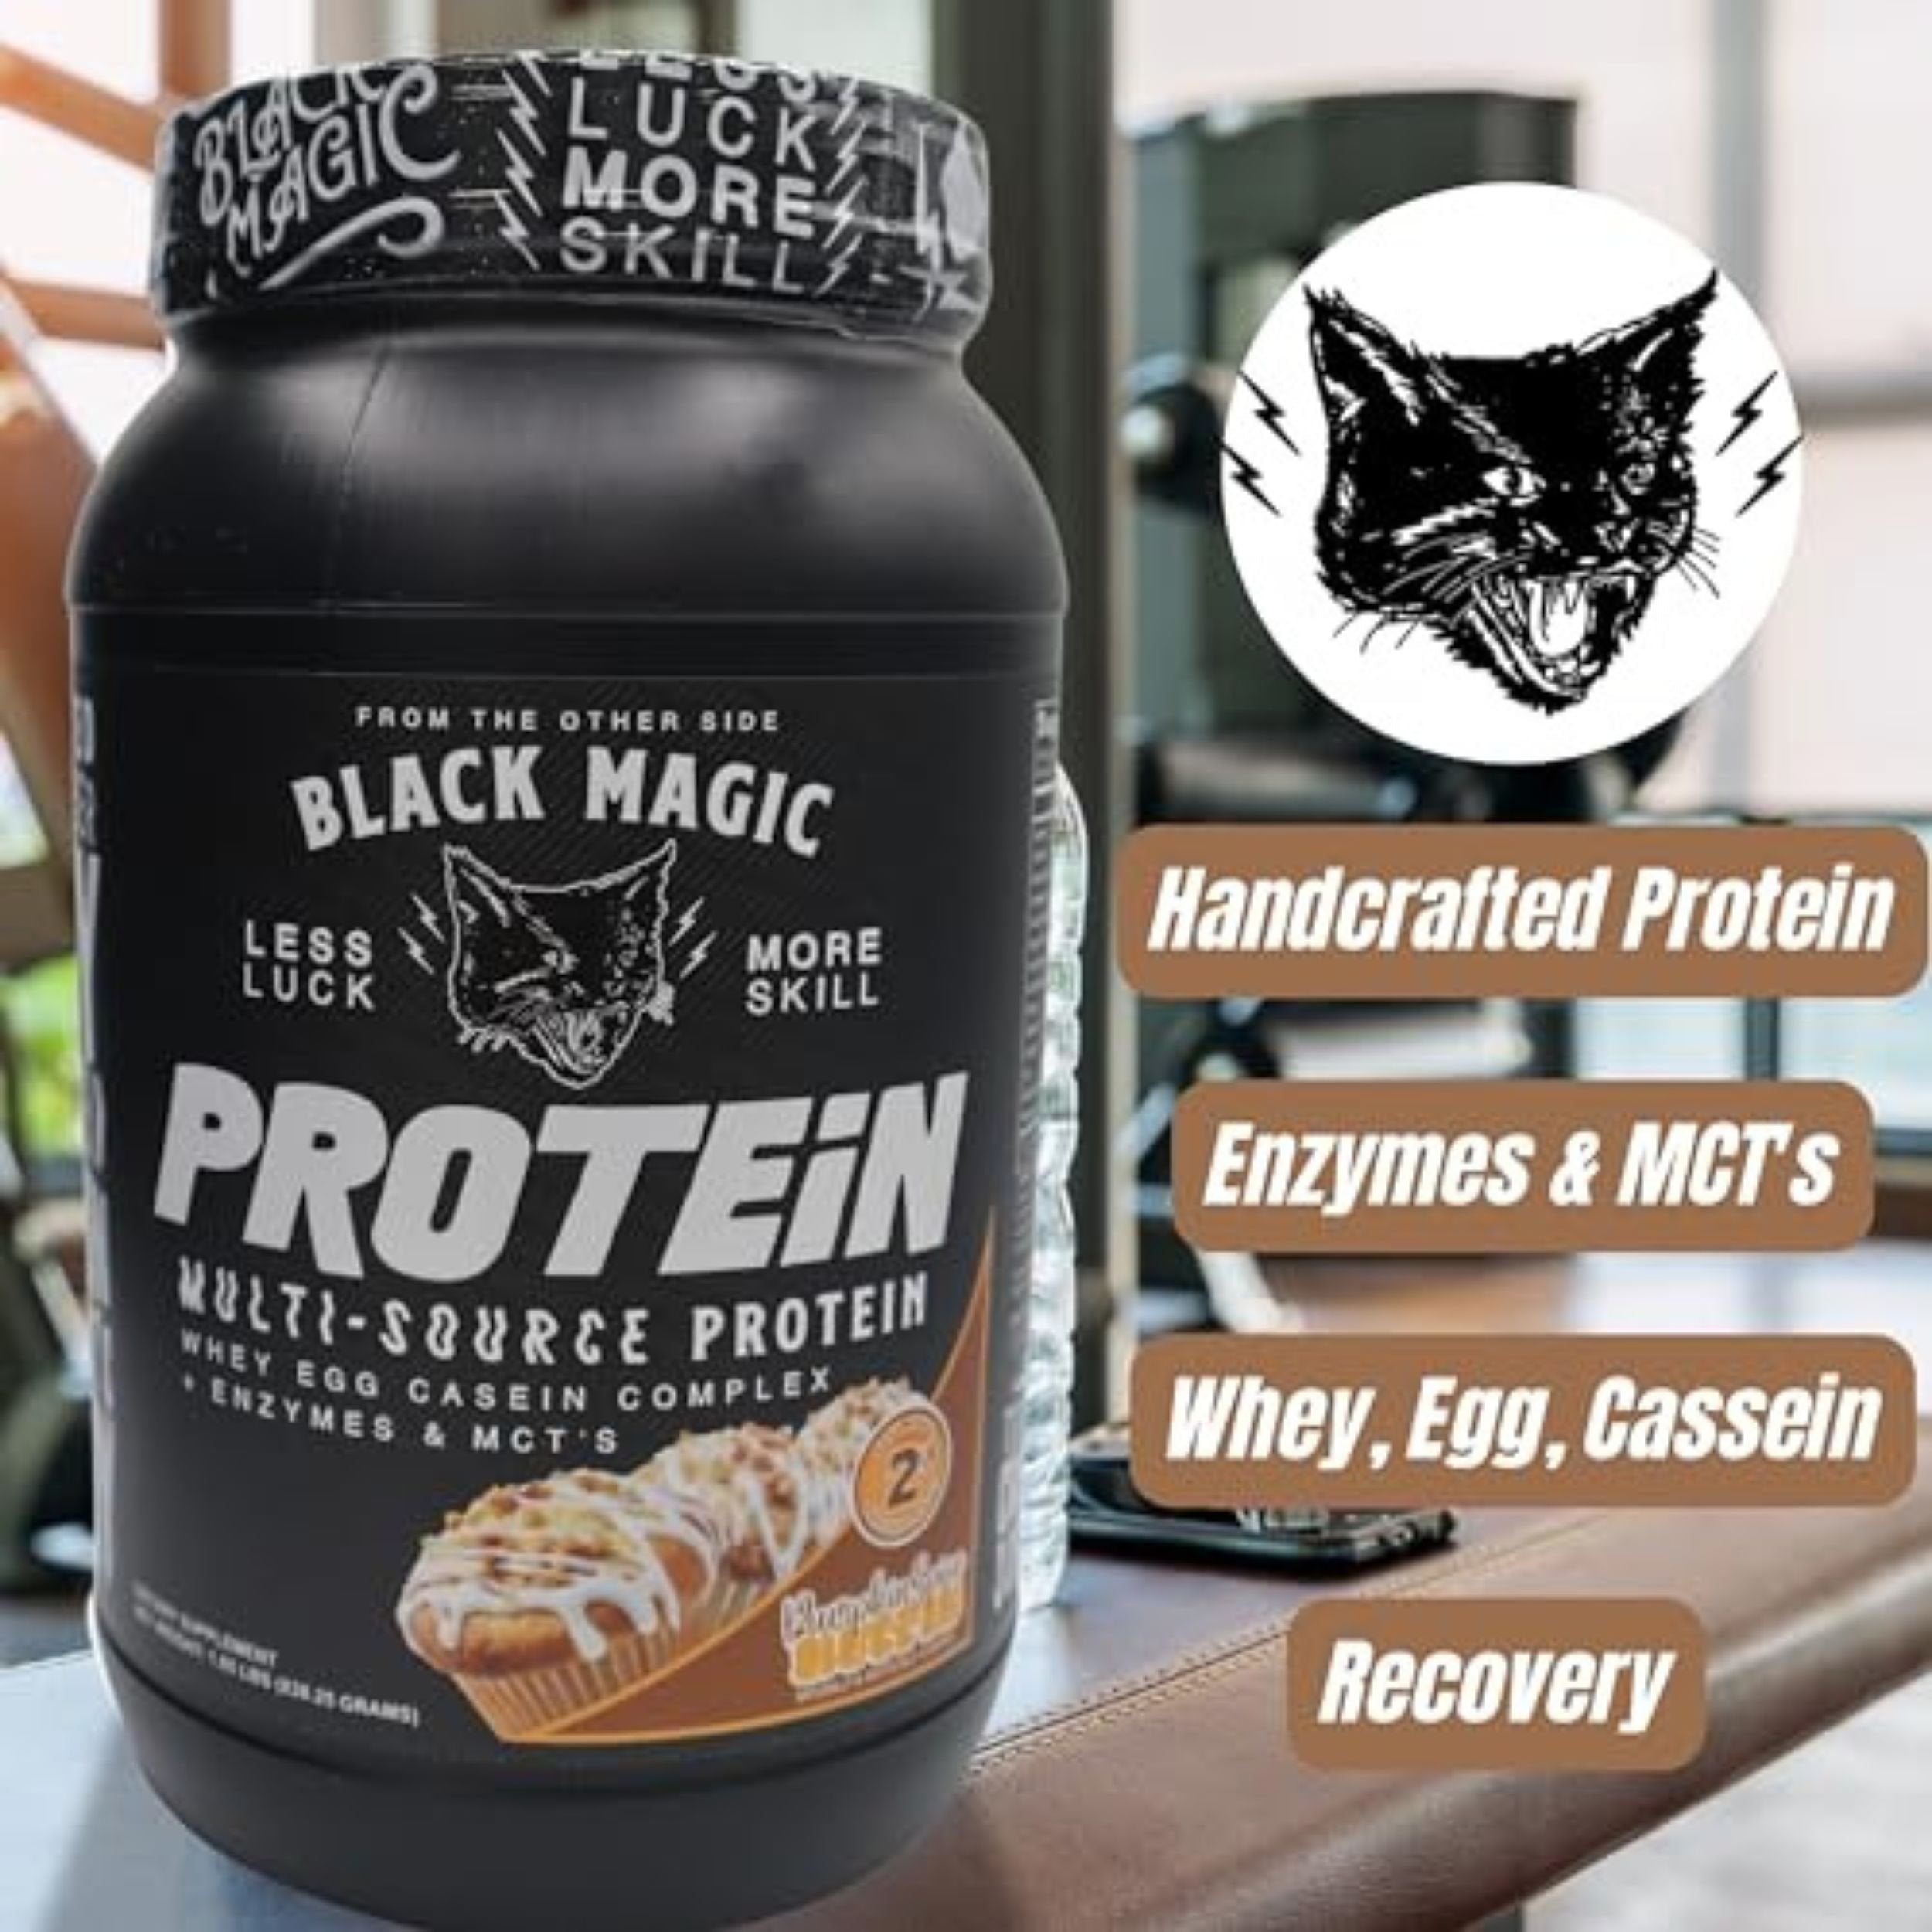 Black Magic Multi Source Protein Powder Whey, Egg Albumin Enzymes, Micellar Casein & MCTs - 2 Pounds Pumpkin Spice Muffin Flavor and Multi-Purpose Keychain